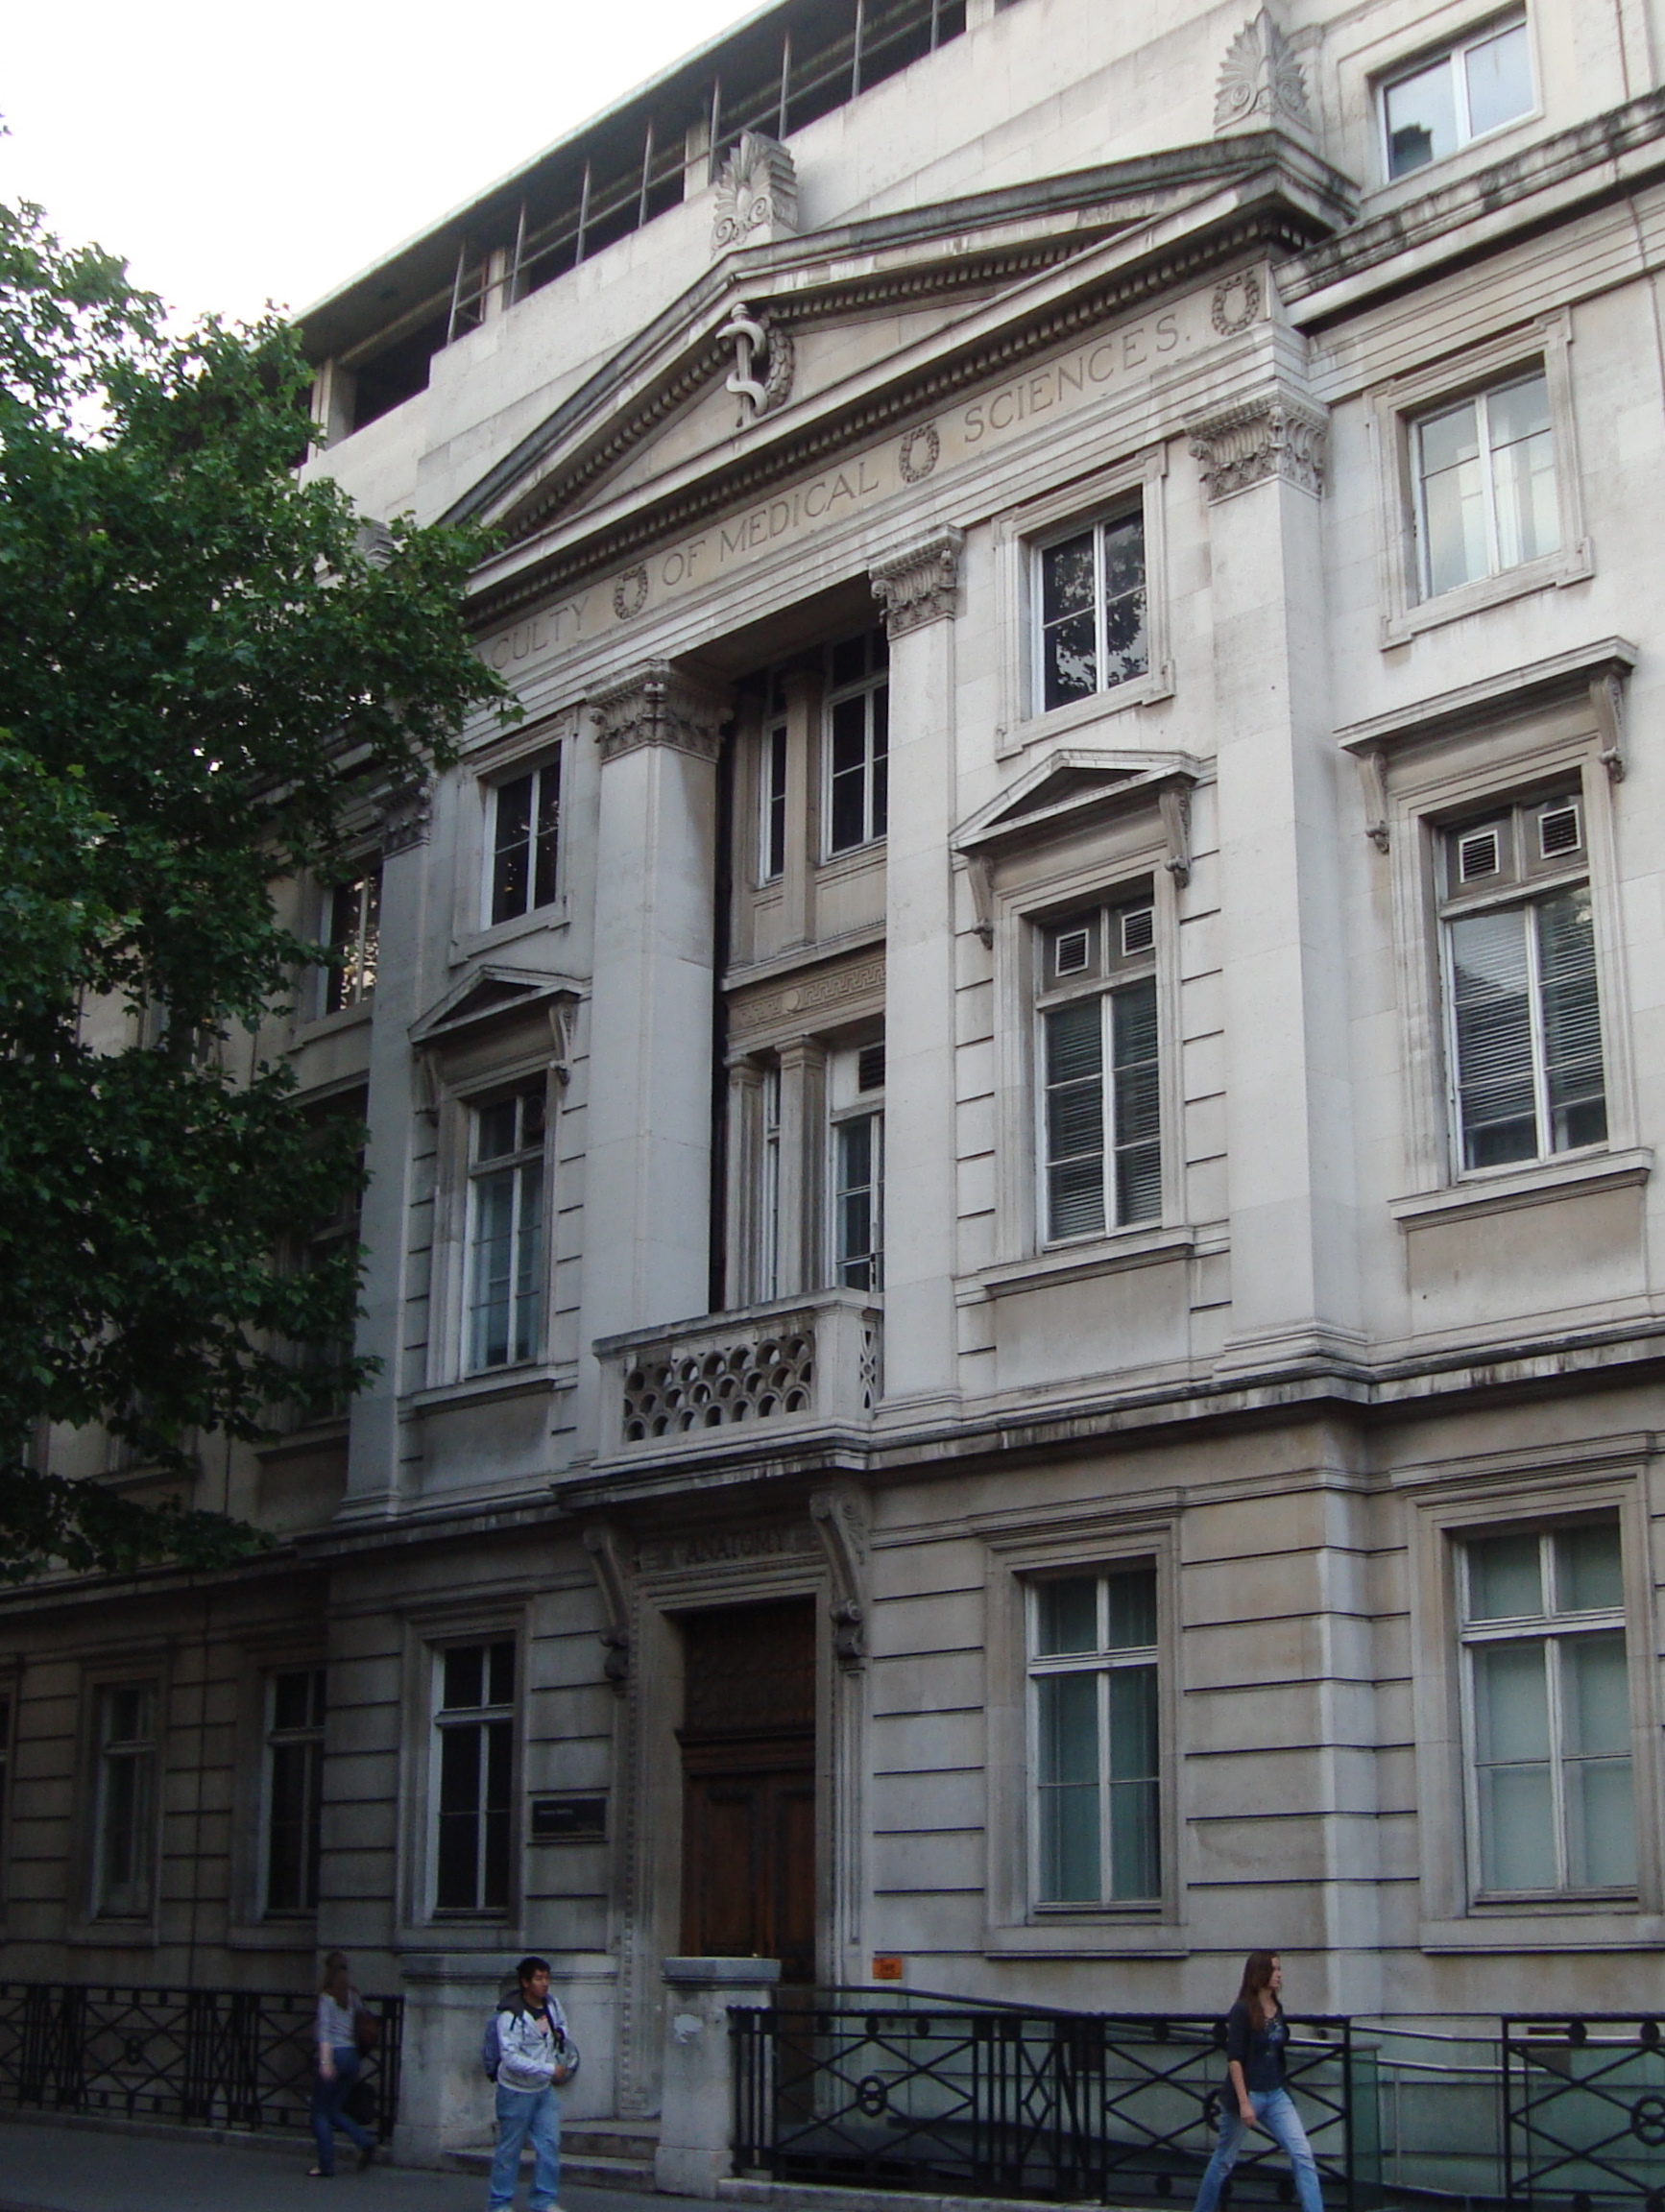 File:Med Sci Fac, Anatomy, UCL.jpg - Wikimedia Commons